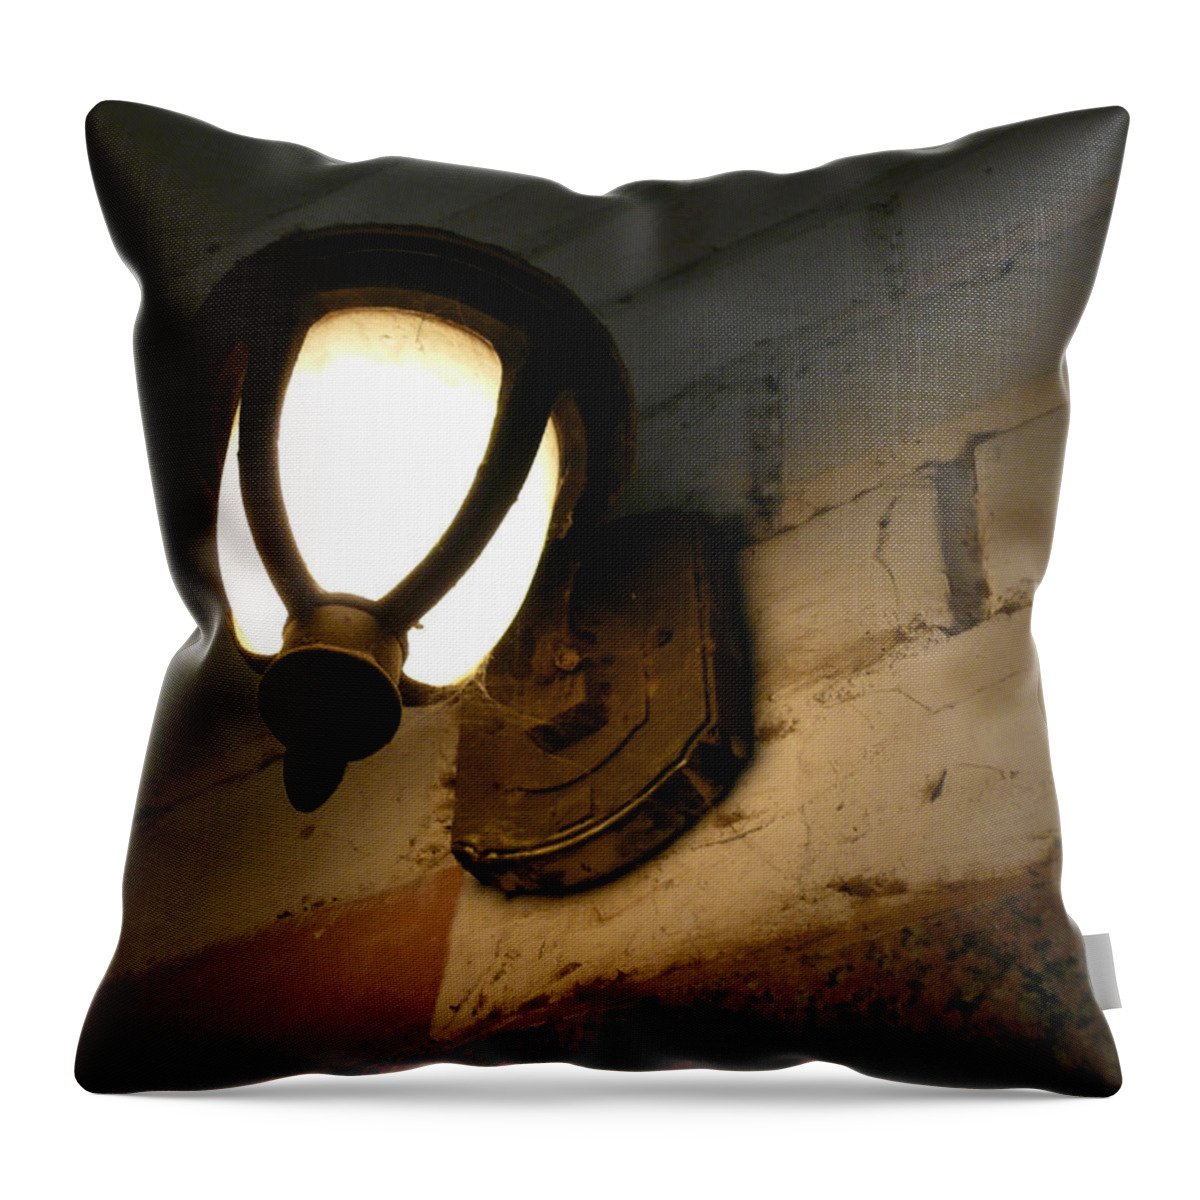 Lamp Throw Pillow featuring the photograph An old style electric lamp on a wall amidst dust and cobwebs by Ashish Agarwal